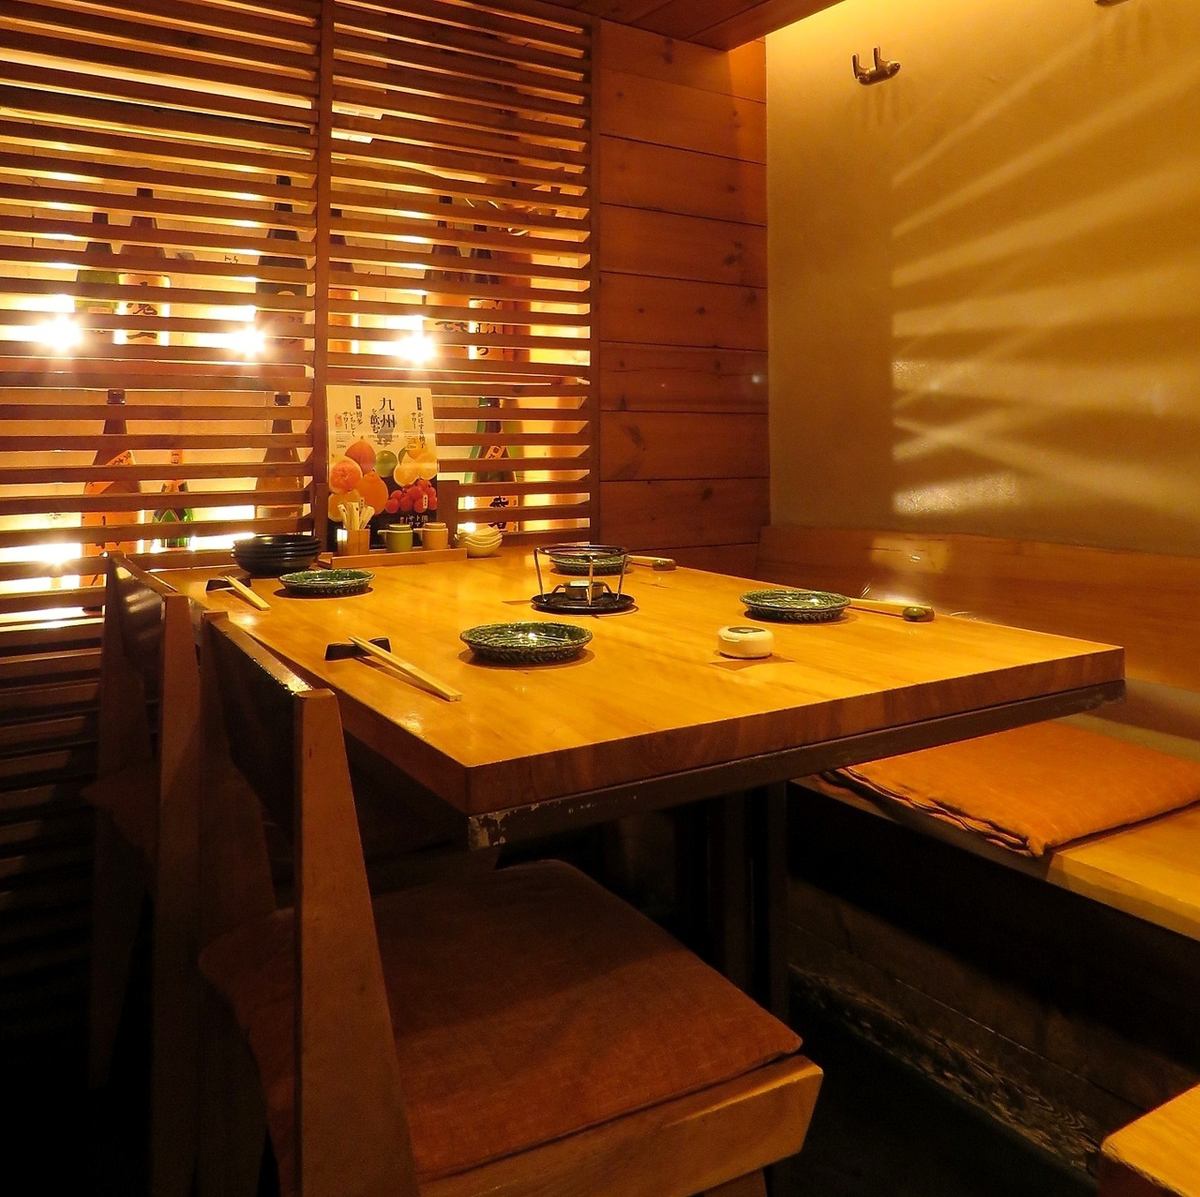 The stylish interior is perfect for dates, anniversaries, company banquets, etc.